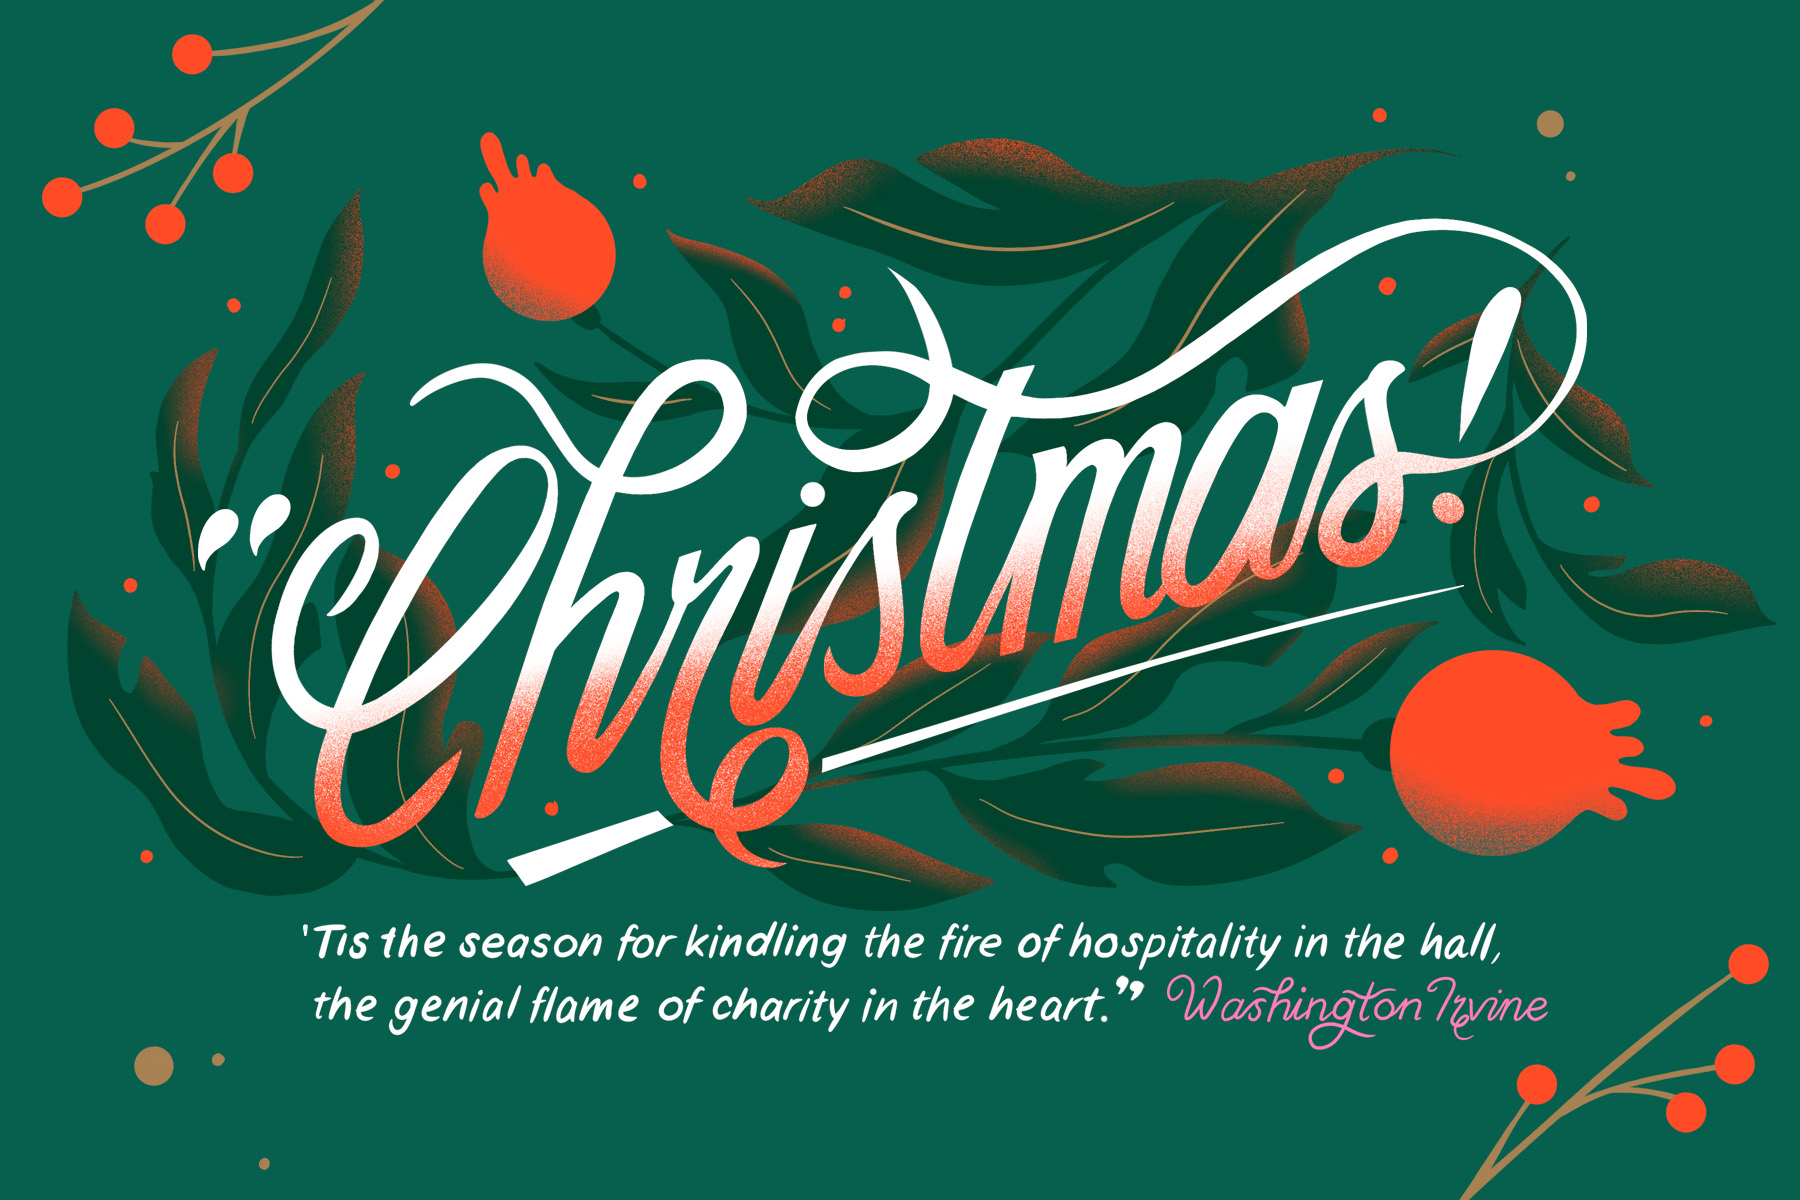 A festive green and red image featuring the quote "Christmas! 'Tis the season for kindling the fire of hospitality in the hall, the genial flame of charity in the heart”, by Washington Irving.